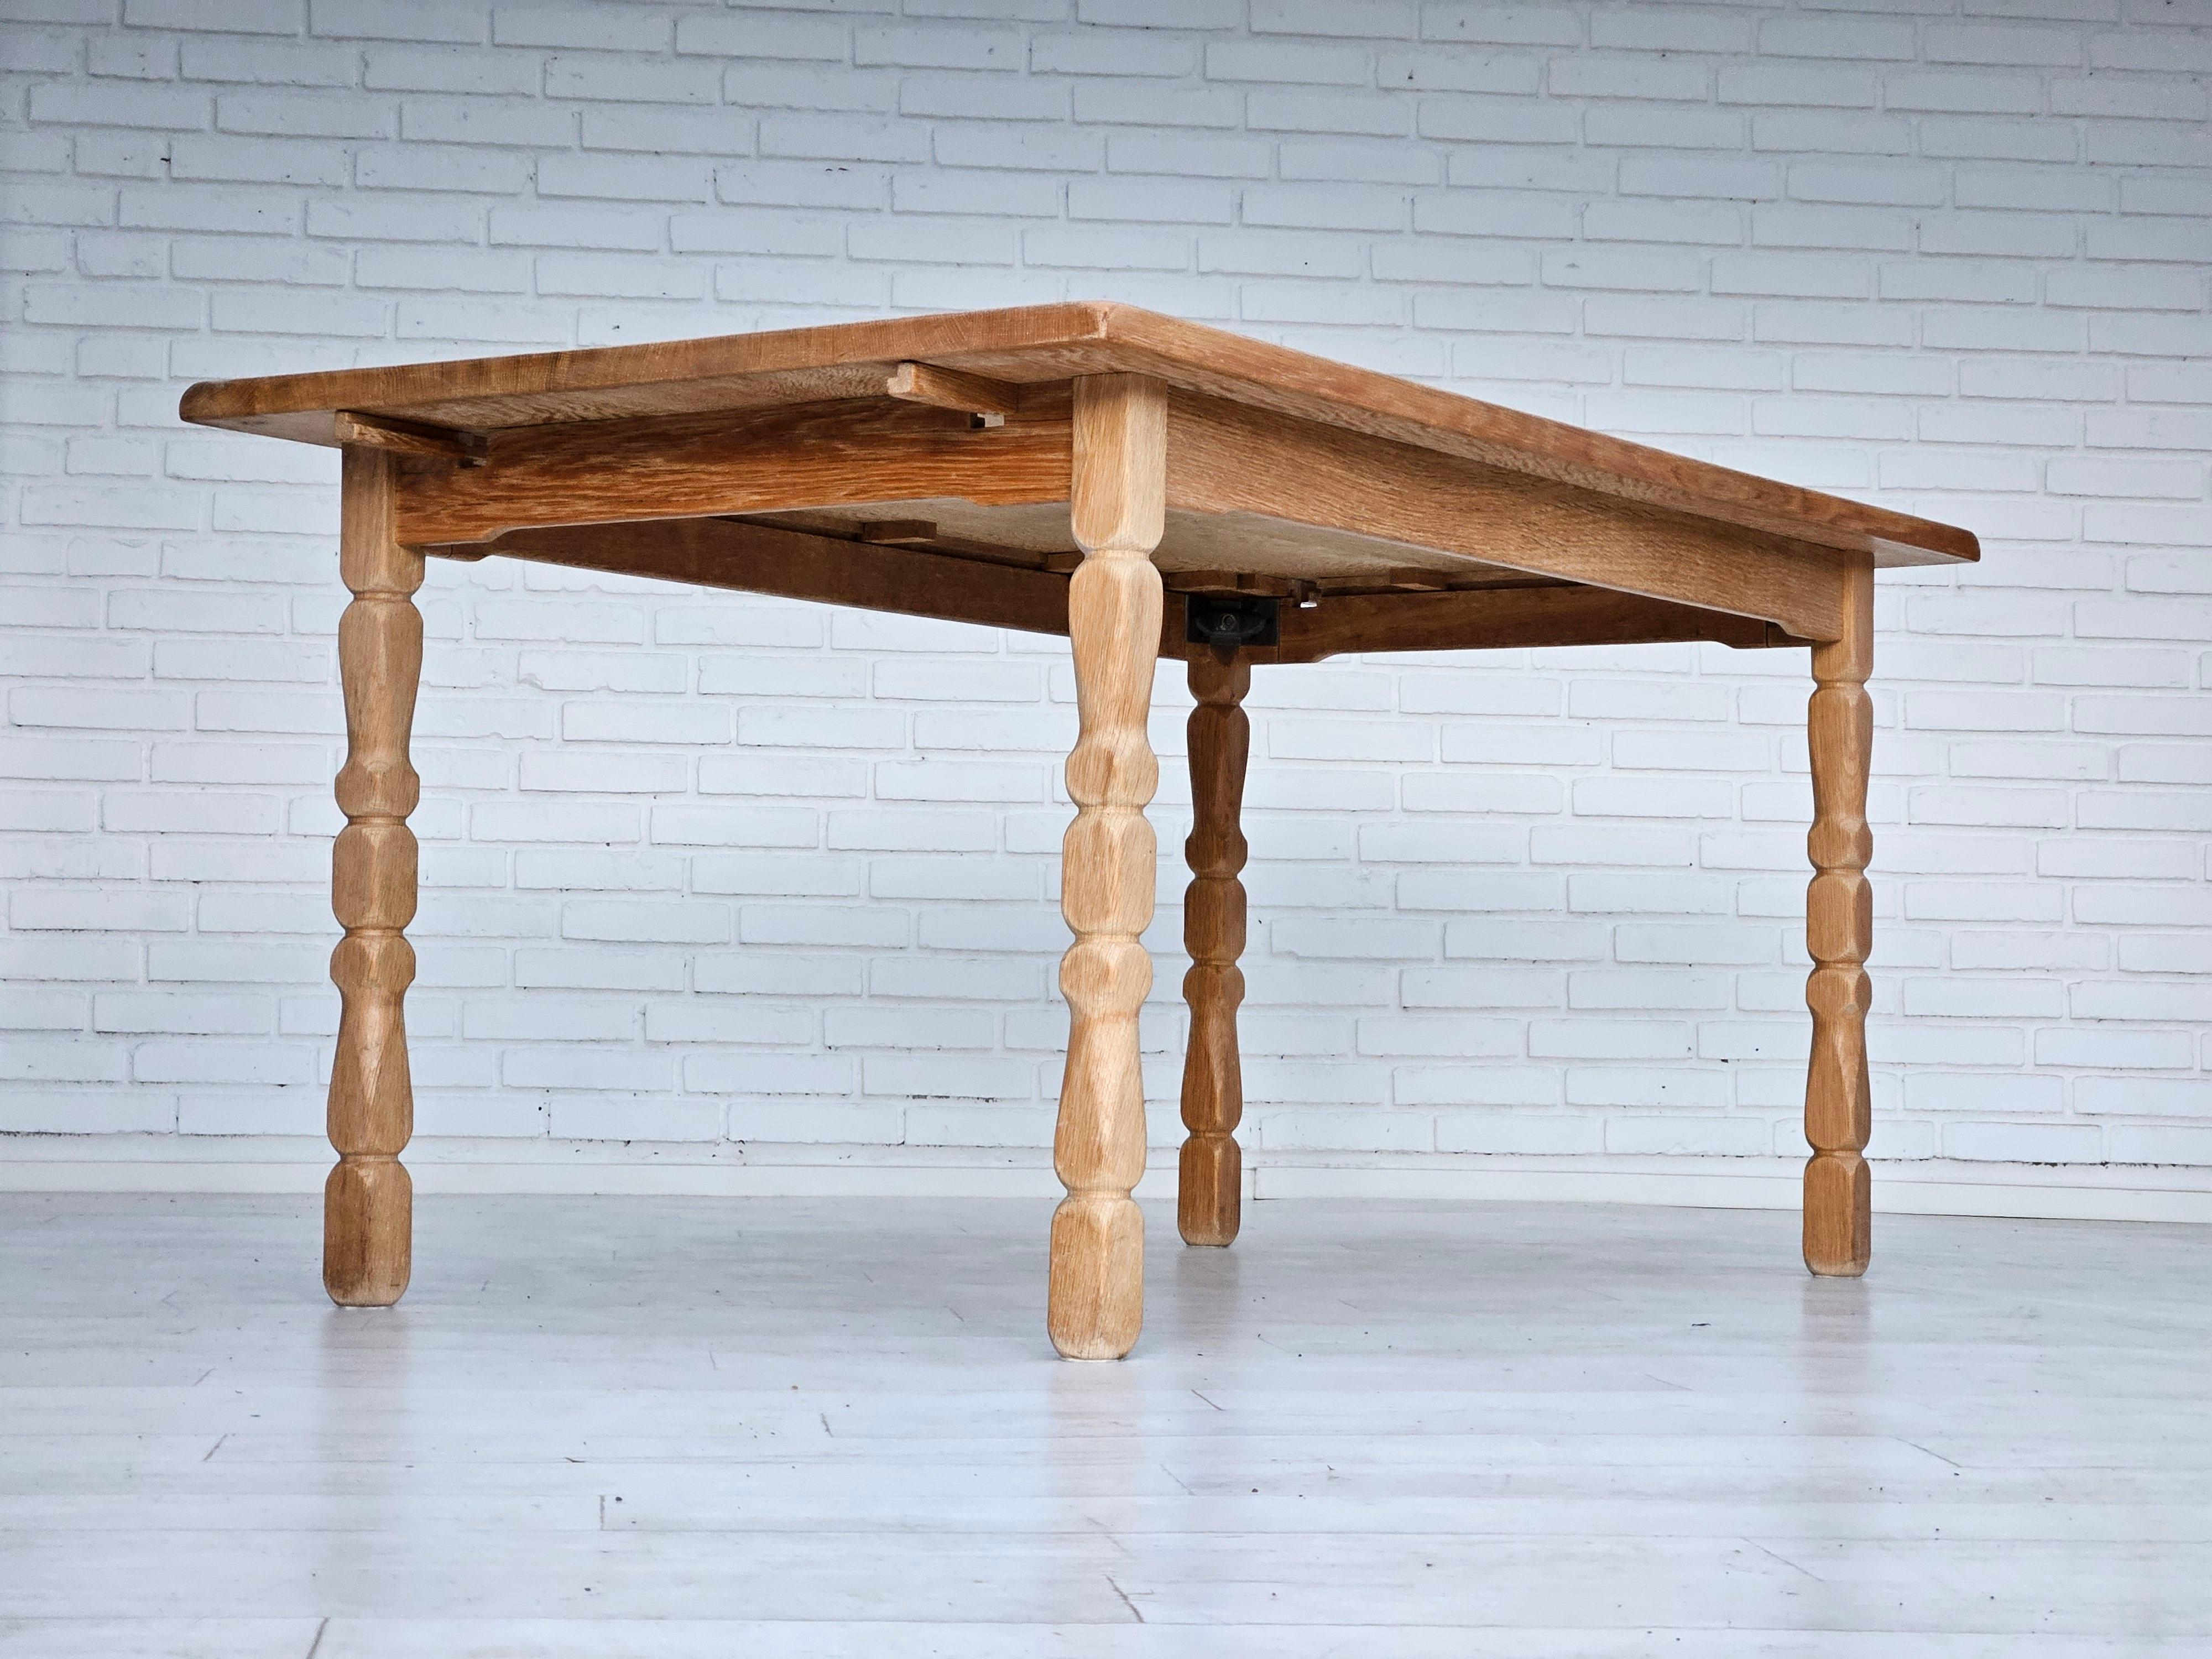 Polished 1970s, Danish dining table, oak wood, original condition.